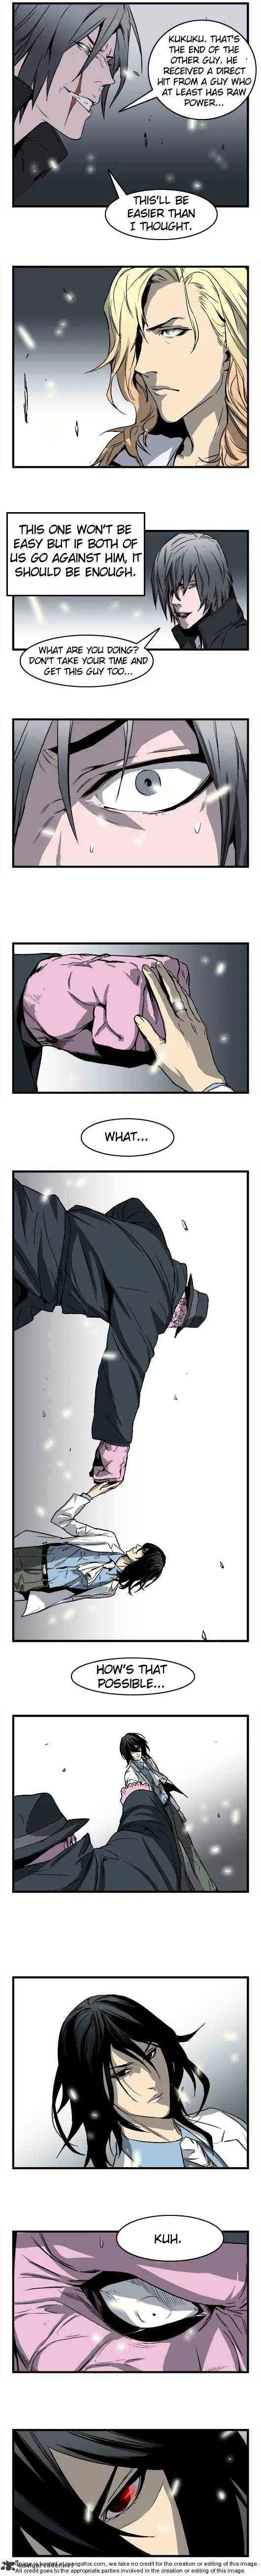 Noblesse Chapter 31 _ Chapters 31-45 page 8